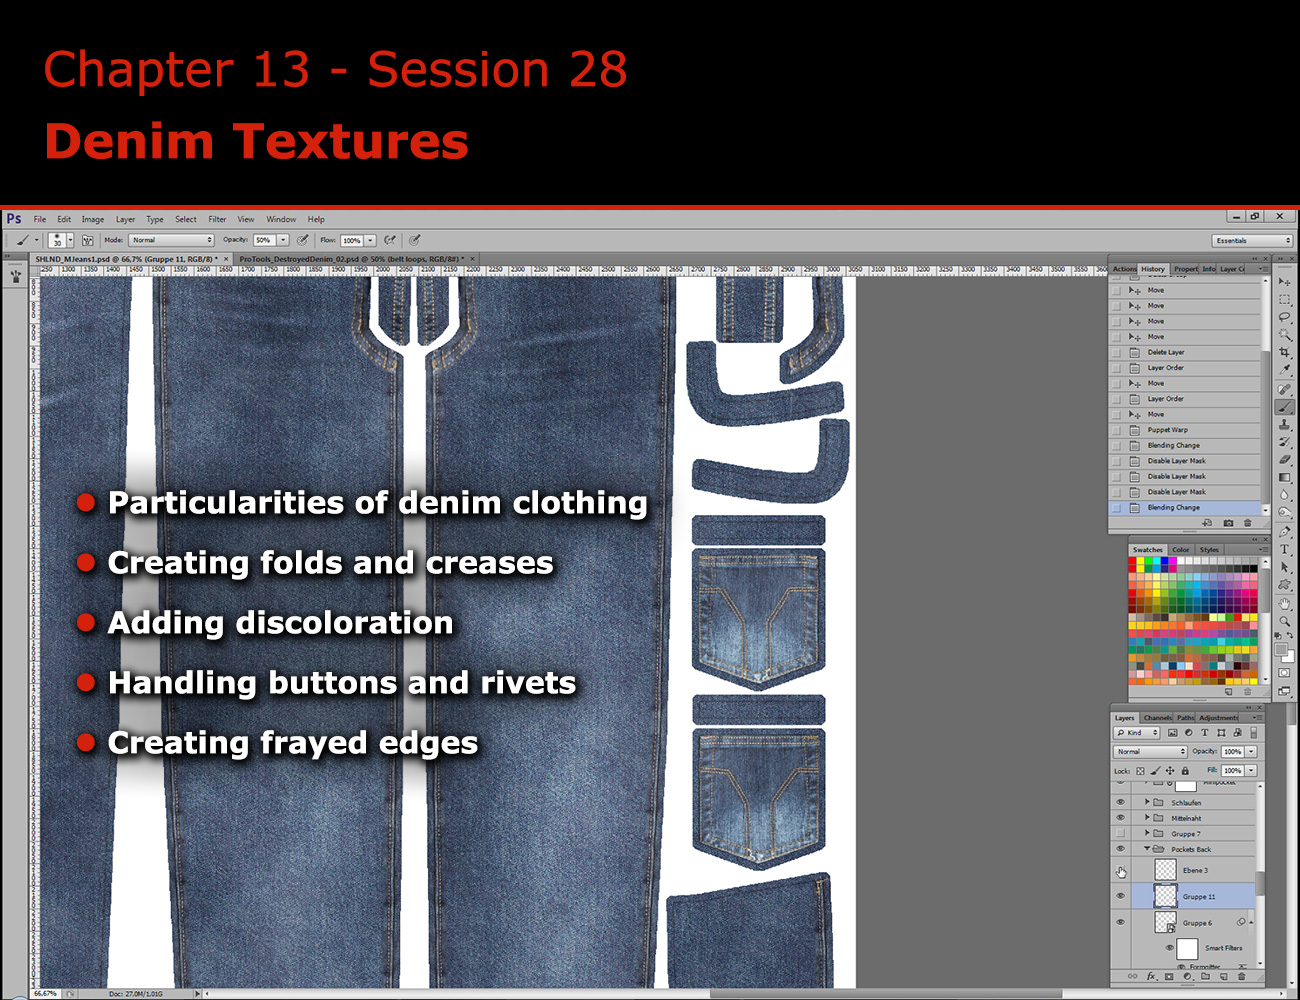 The Complete Guide to Texturing Clothing - Part 5